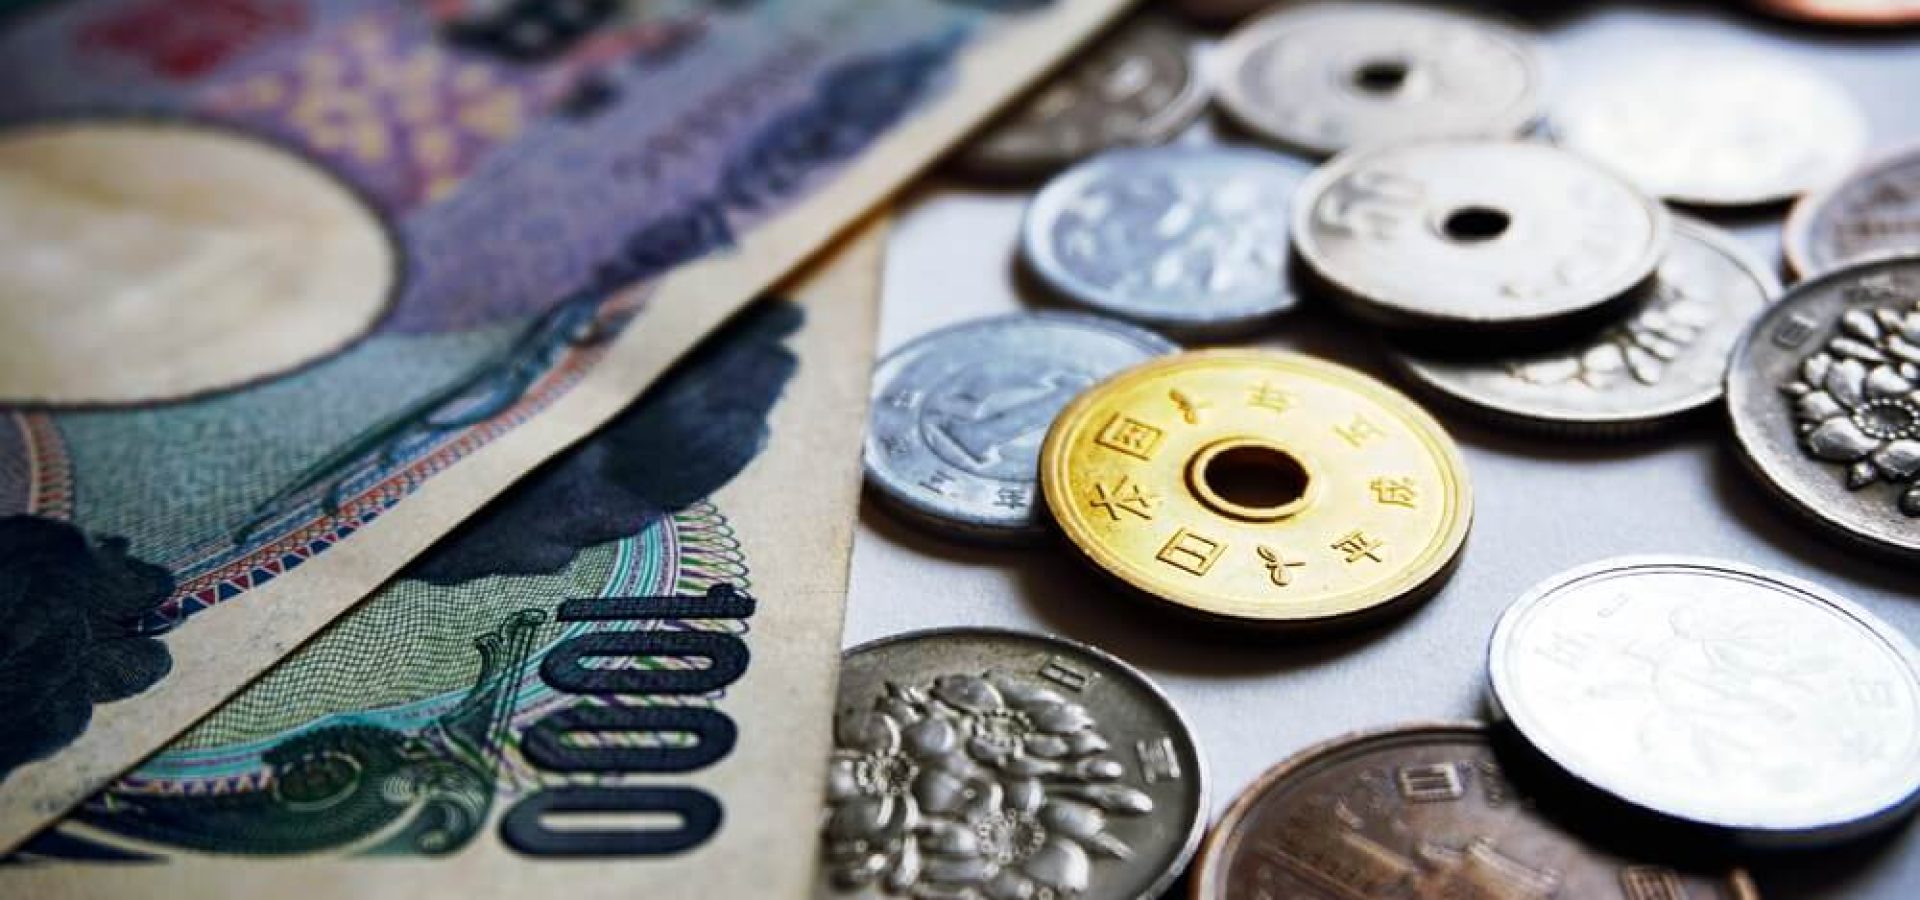 Japanese core machinery, Japanese coins and bills